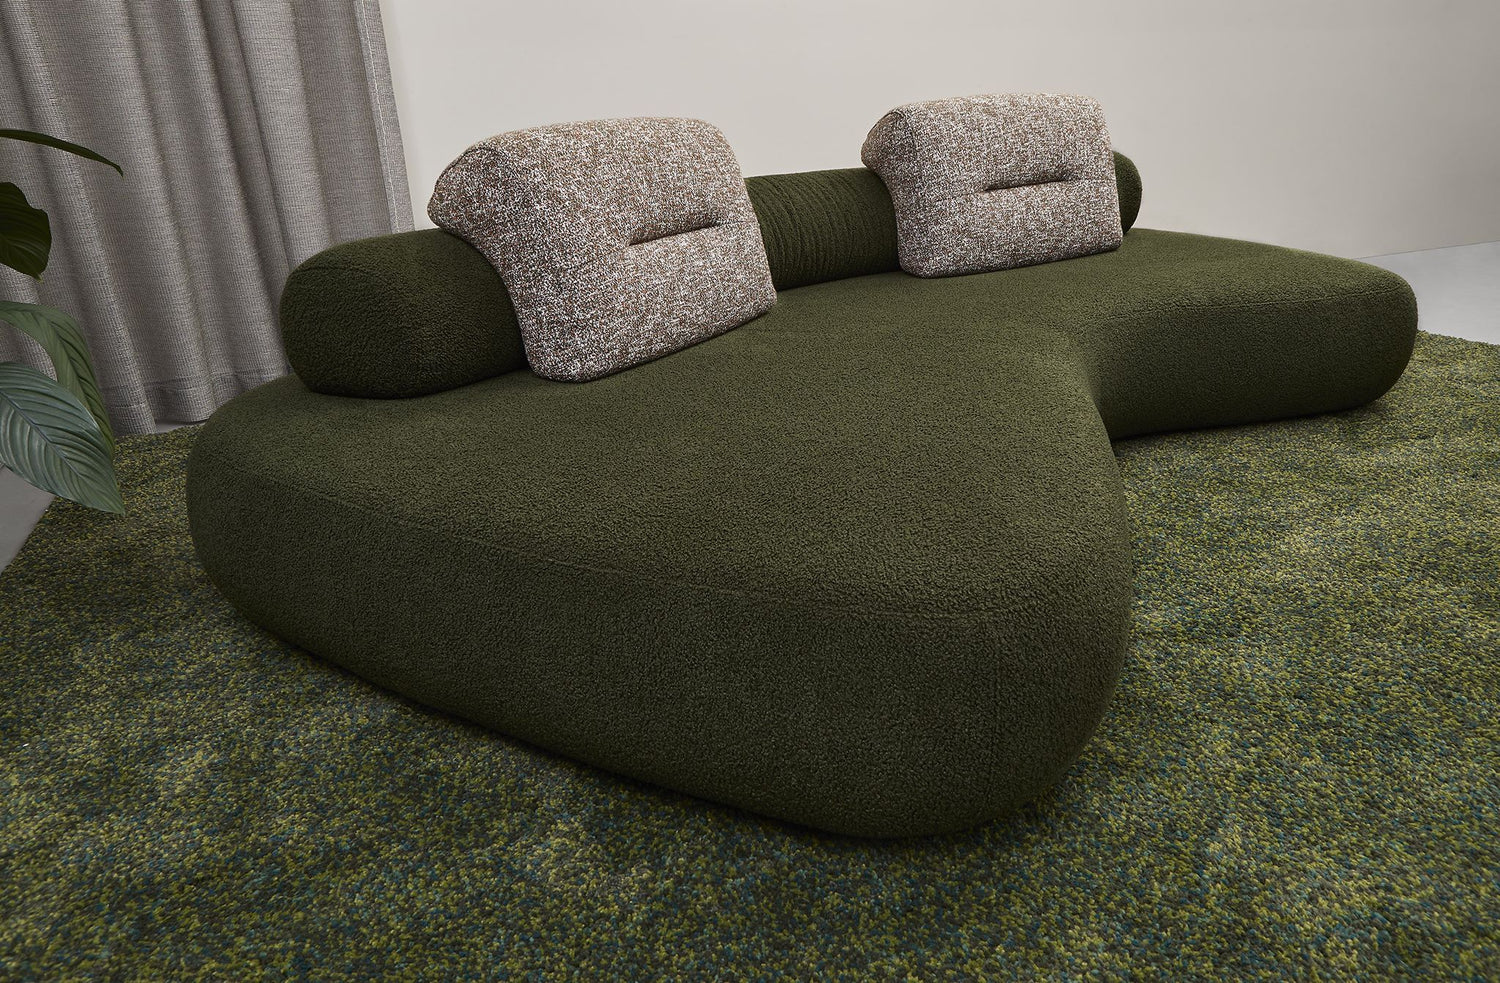 Rolly curved sofa 3 metre from left hand side in green with moveable back roll and back cushions